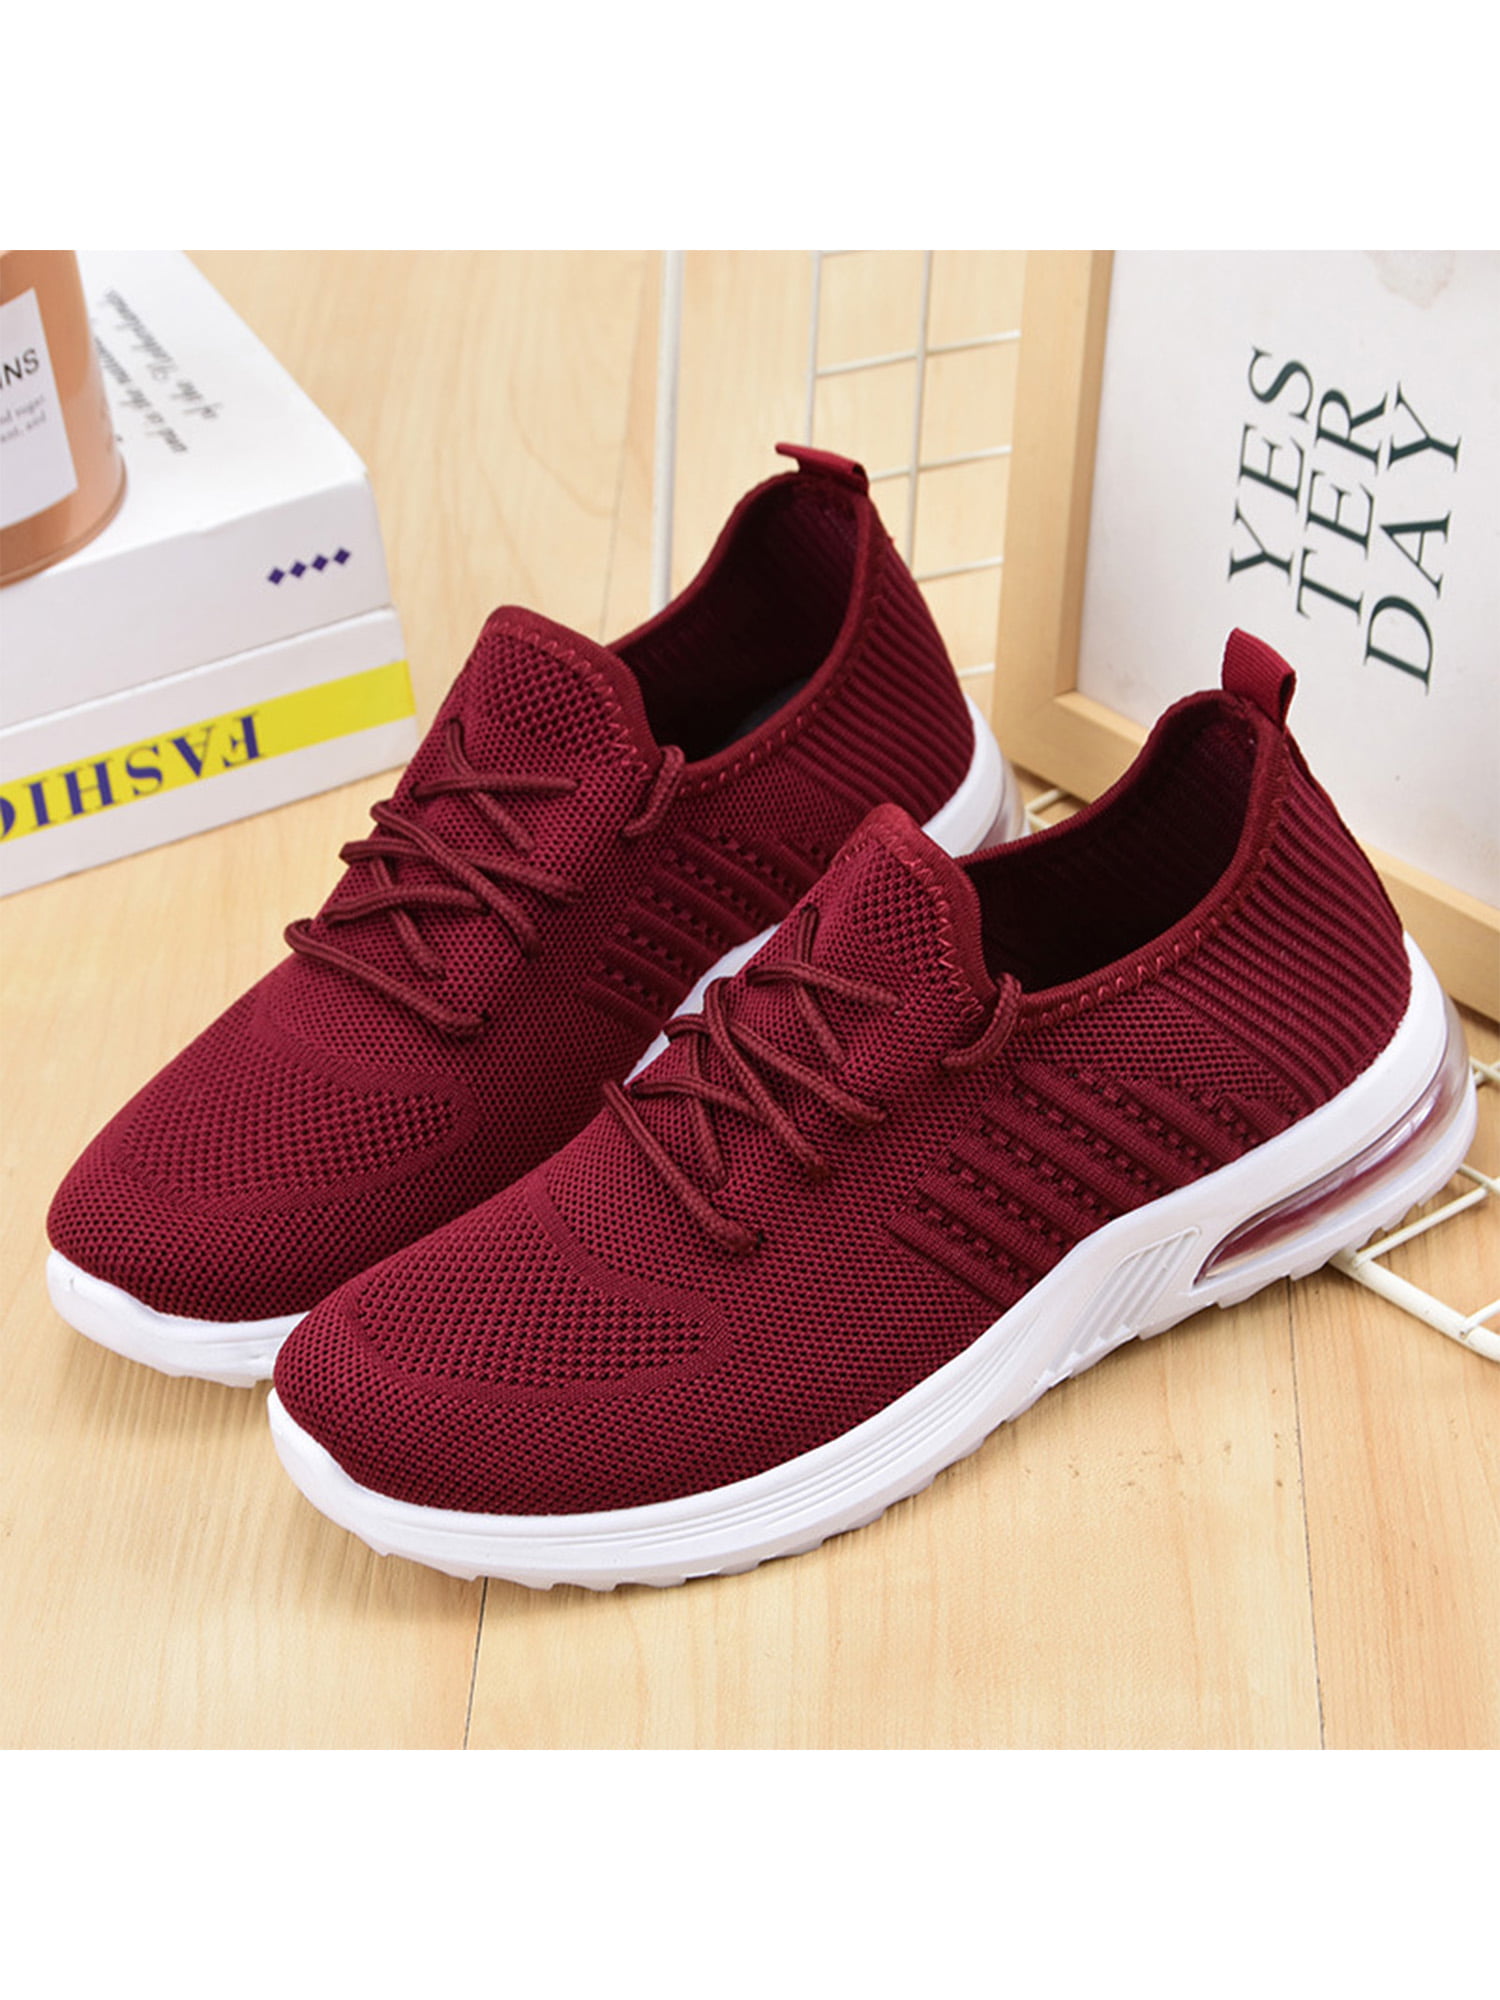 Details about   Women Ladies Knitted Fabric Casual Athletic Shoes Outdoor Fitness Walk Sneakers